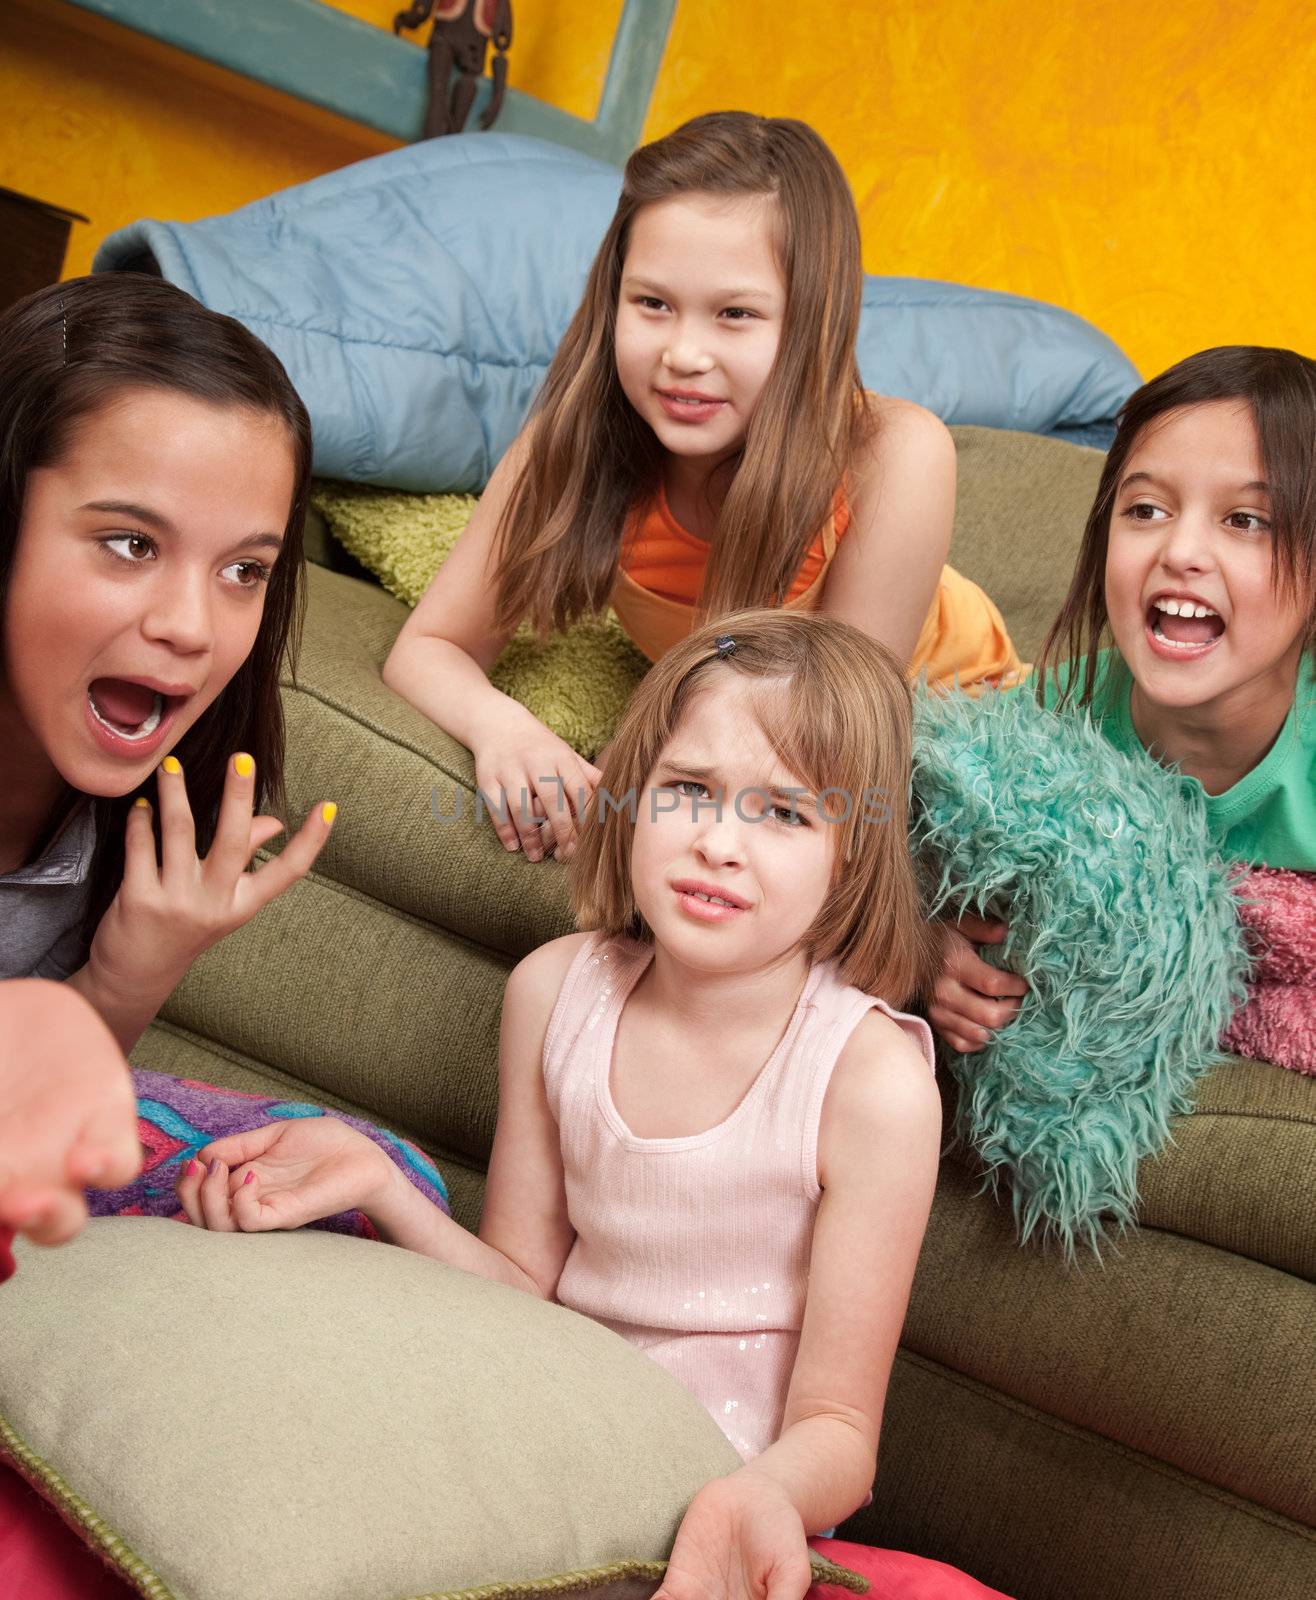 Four little outraged girls at a sleepover